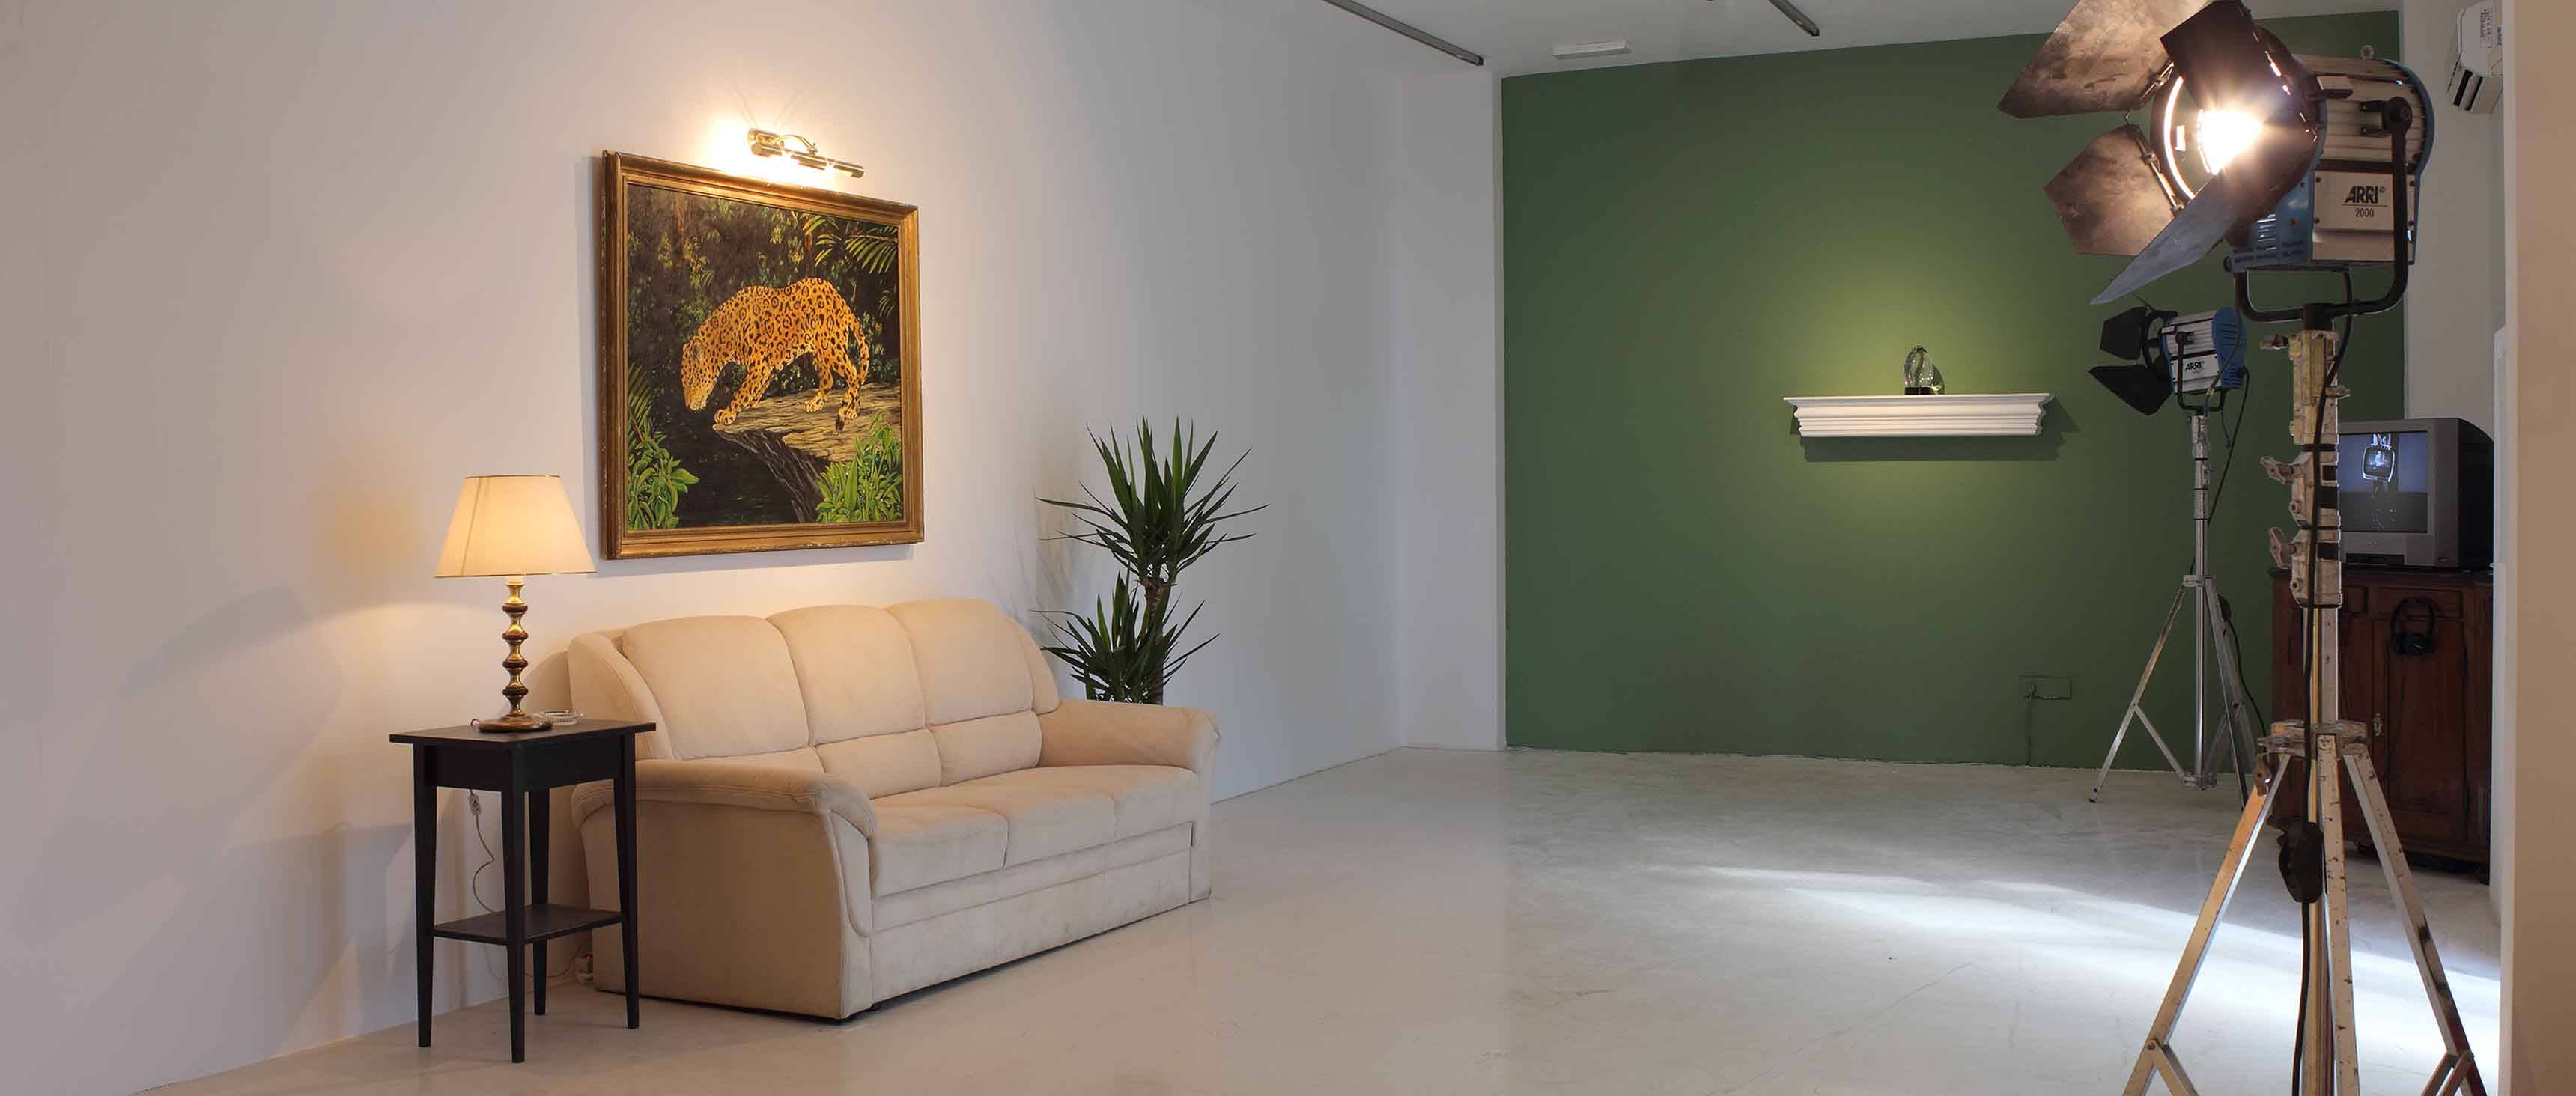 FADE IN 2: EXT. MODERNIST HOME — NIGHT - Installation view